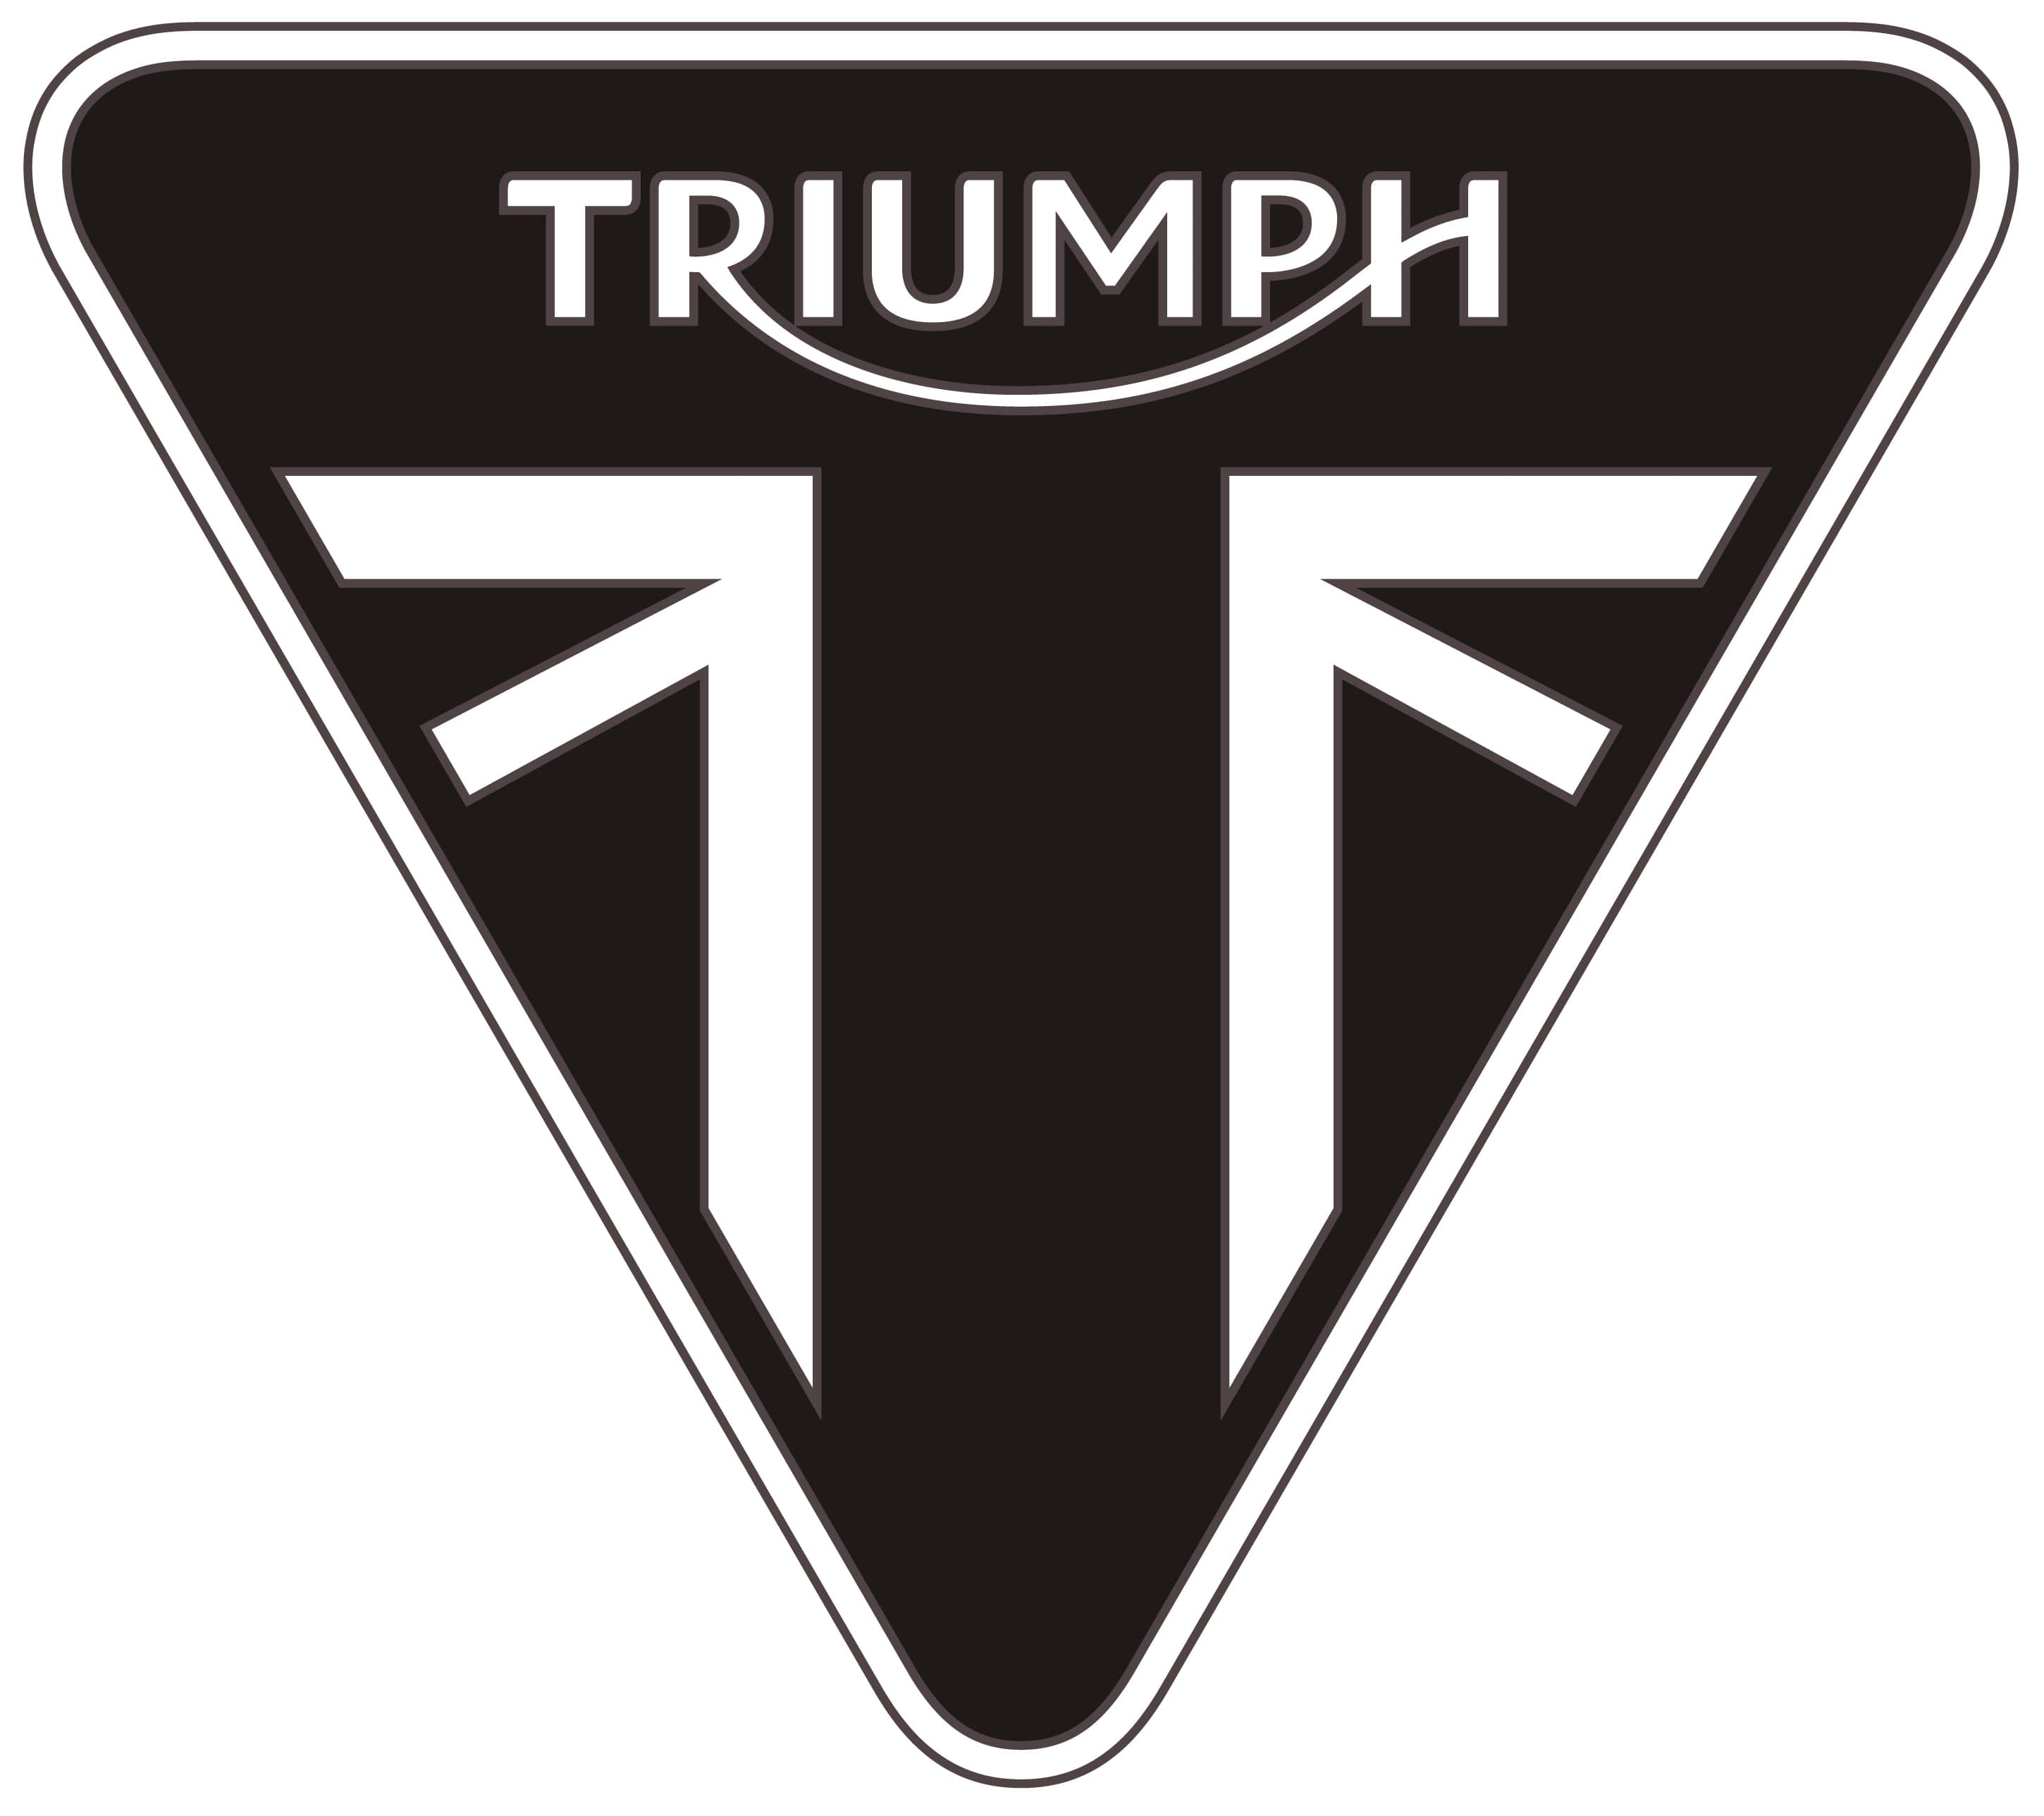 Triumph Tiger Logo - Triumph logo: history, evolution, meaning | Motorcycle Brands